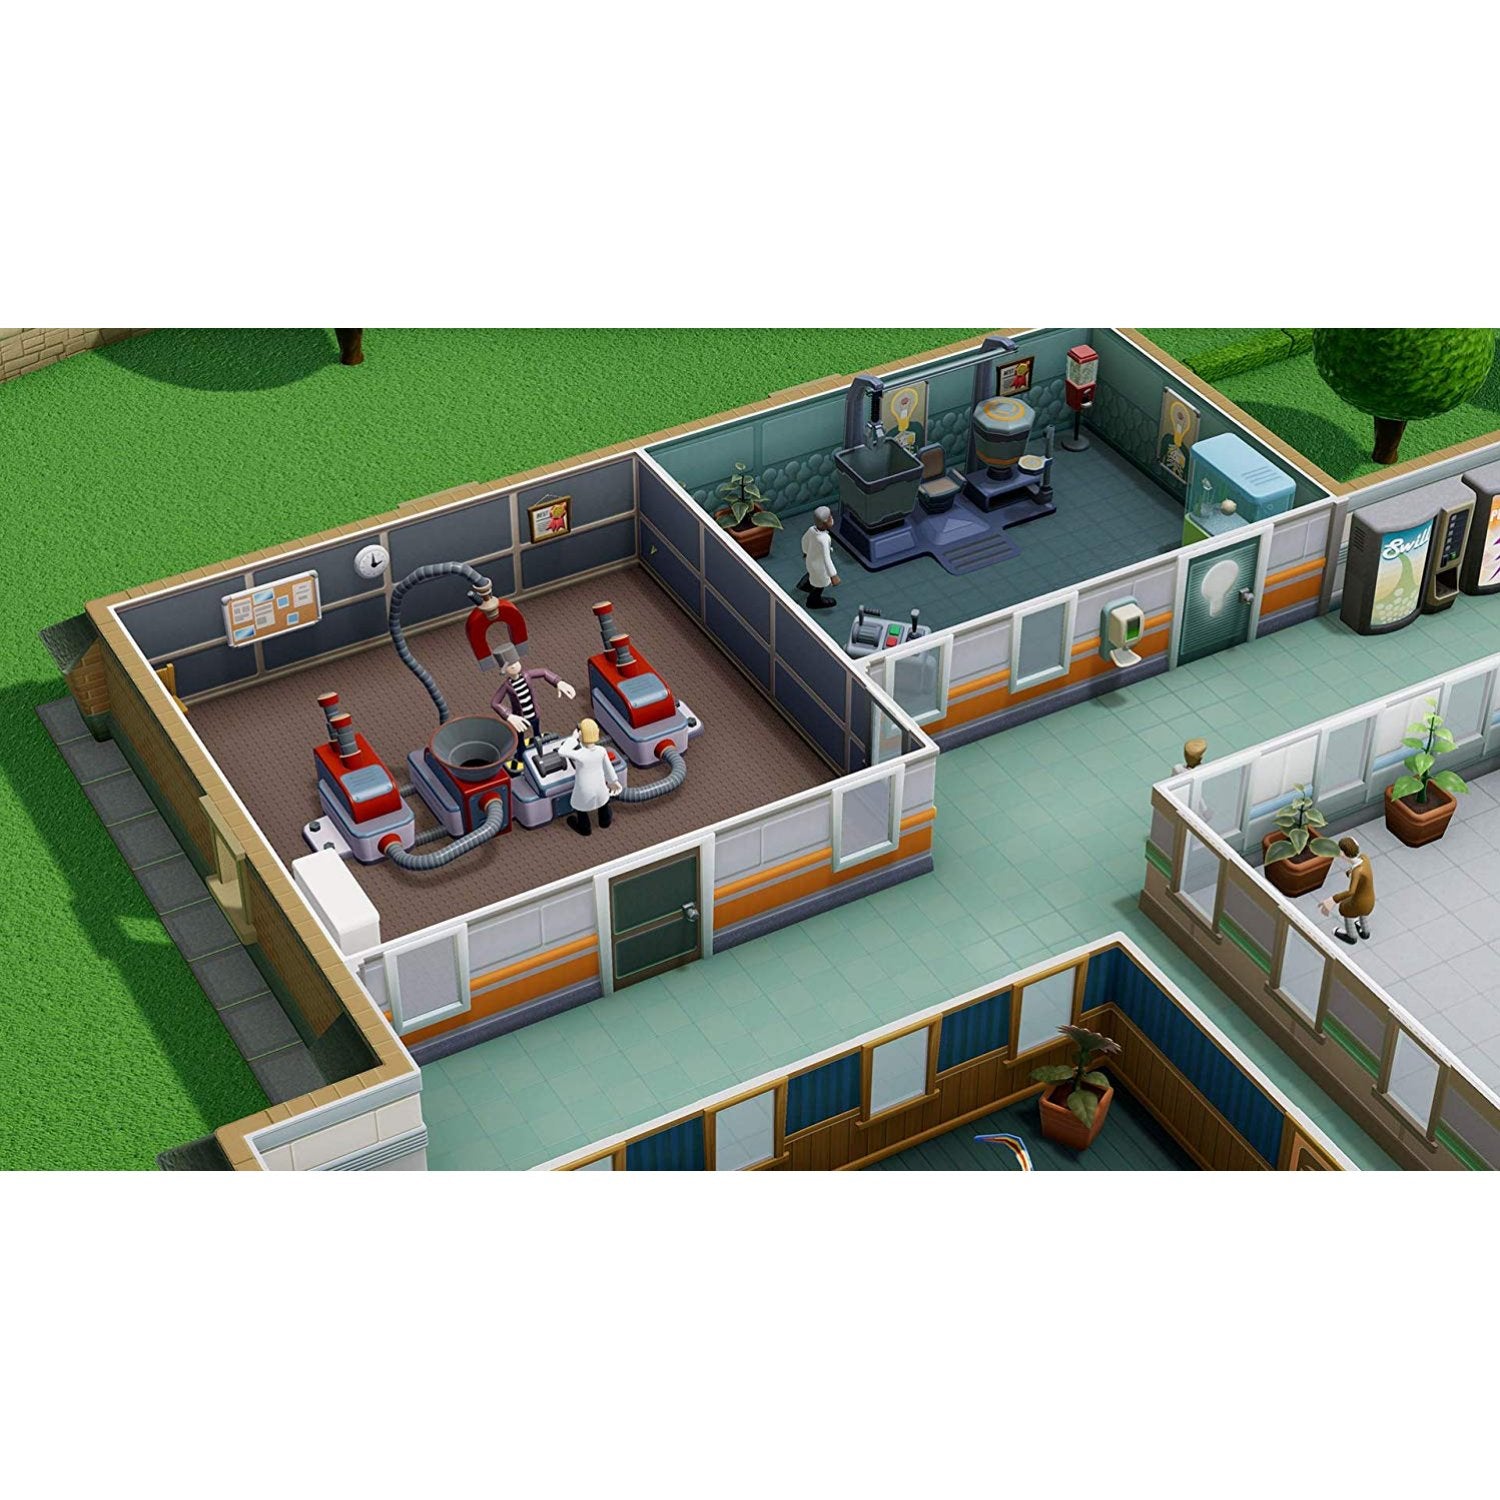 NSW Two Point Hospital